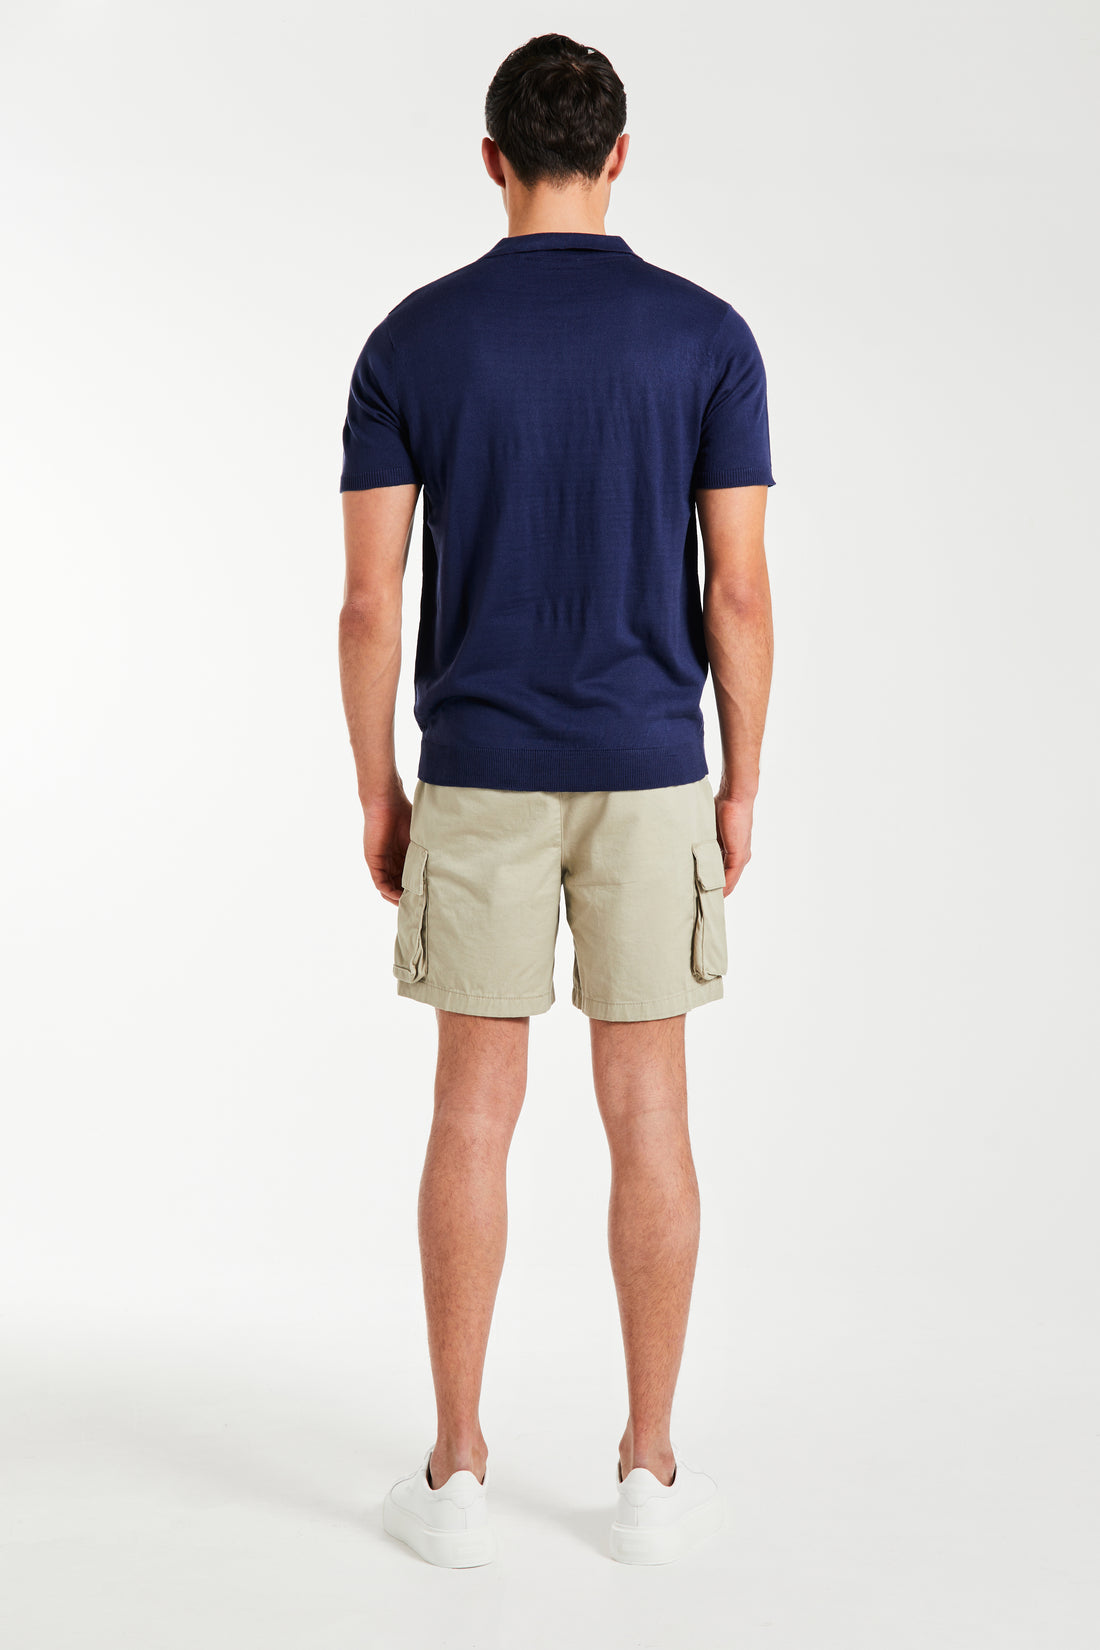 back profile of model wearing men's utility shorts and polo